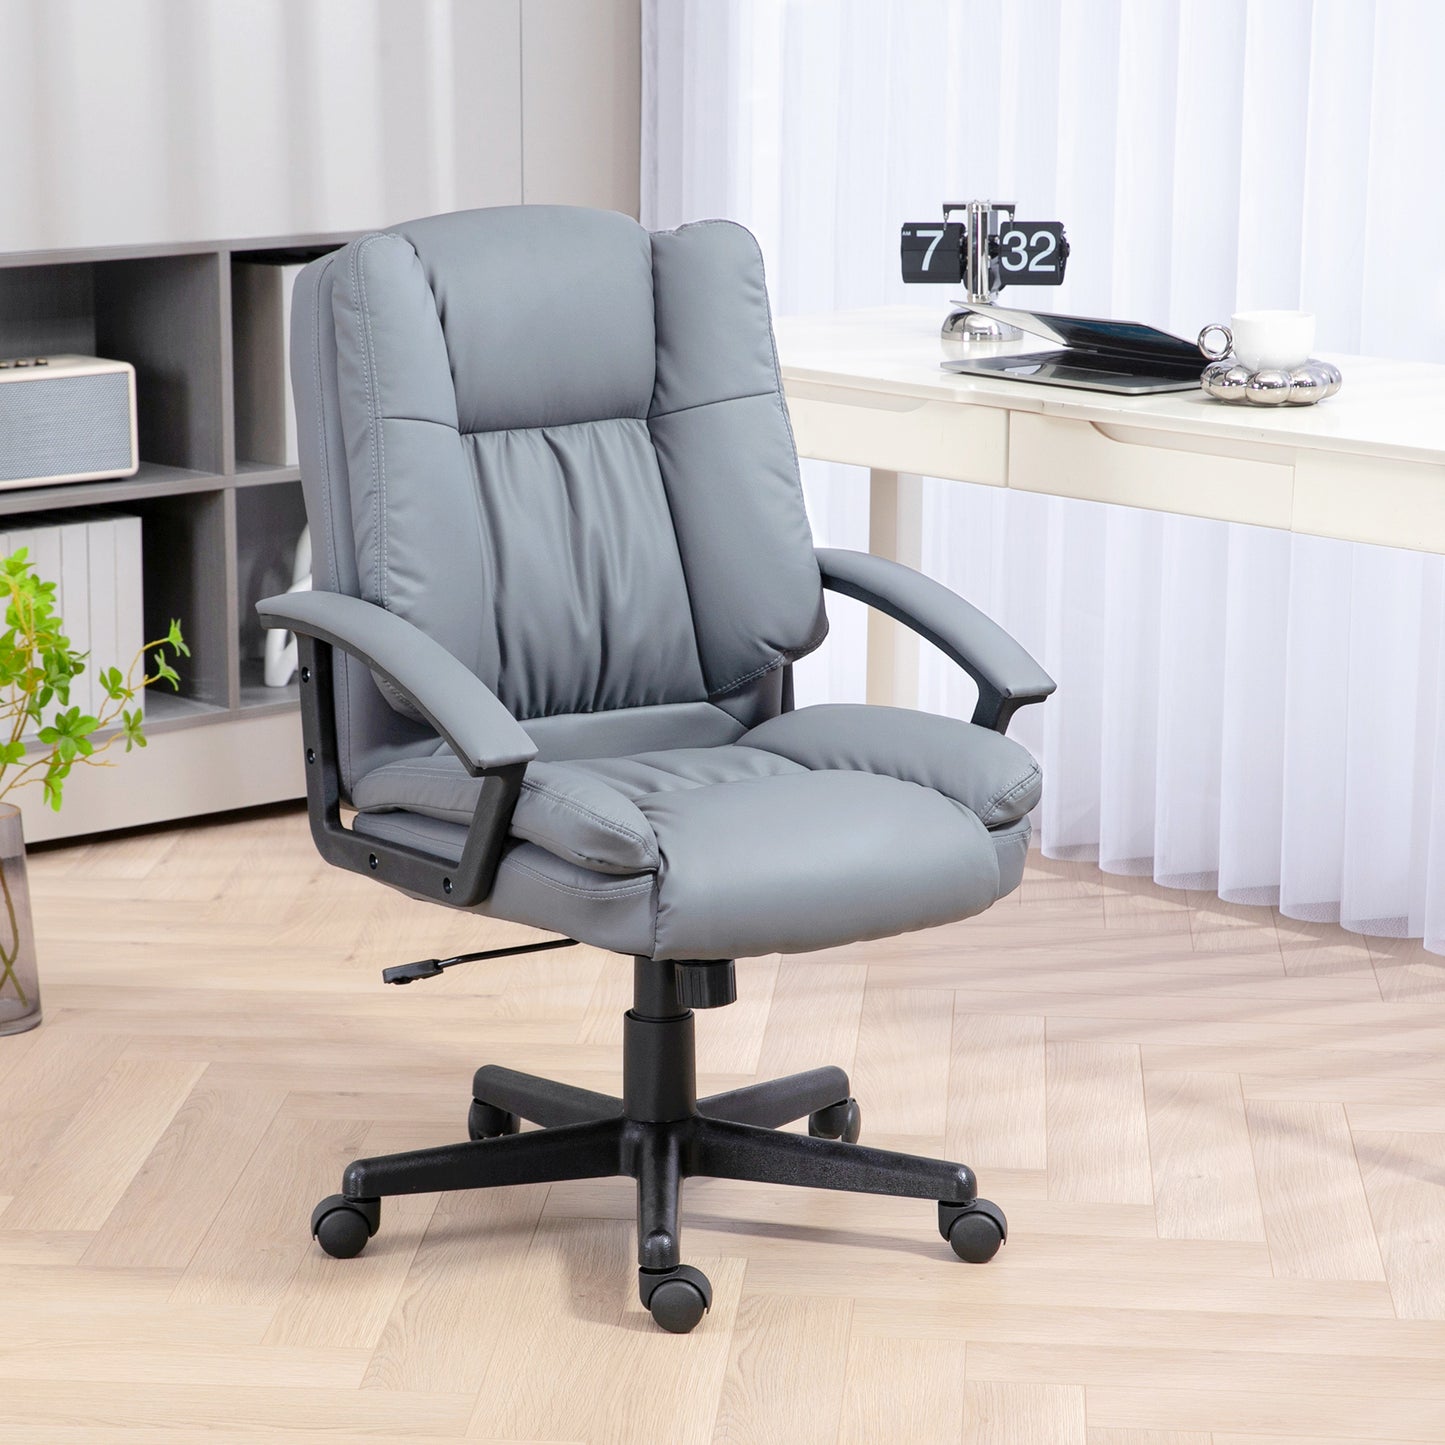 Vinsetto Office Chair, Faux Leather Computer Desk Chair, Mid Back Executive Chair with Adjustable Height and Swivel Rolling Wheels for Home Study, Light Grey